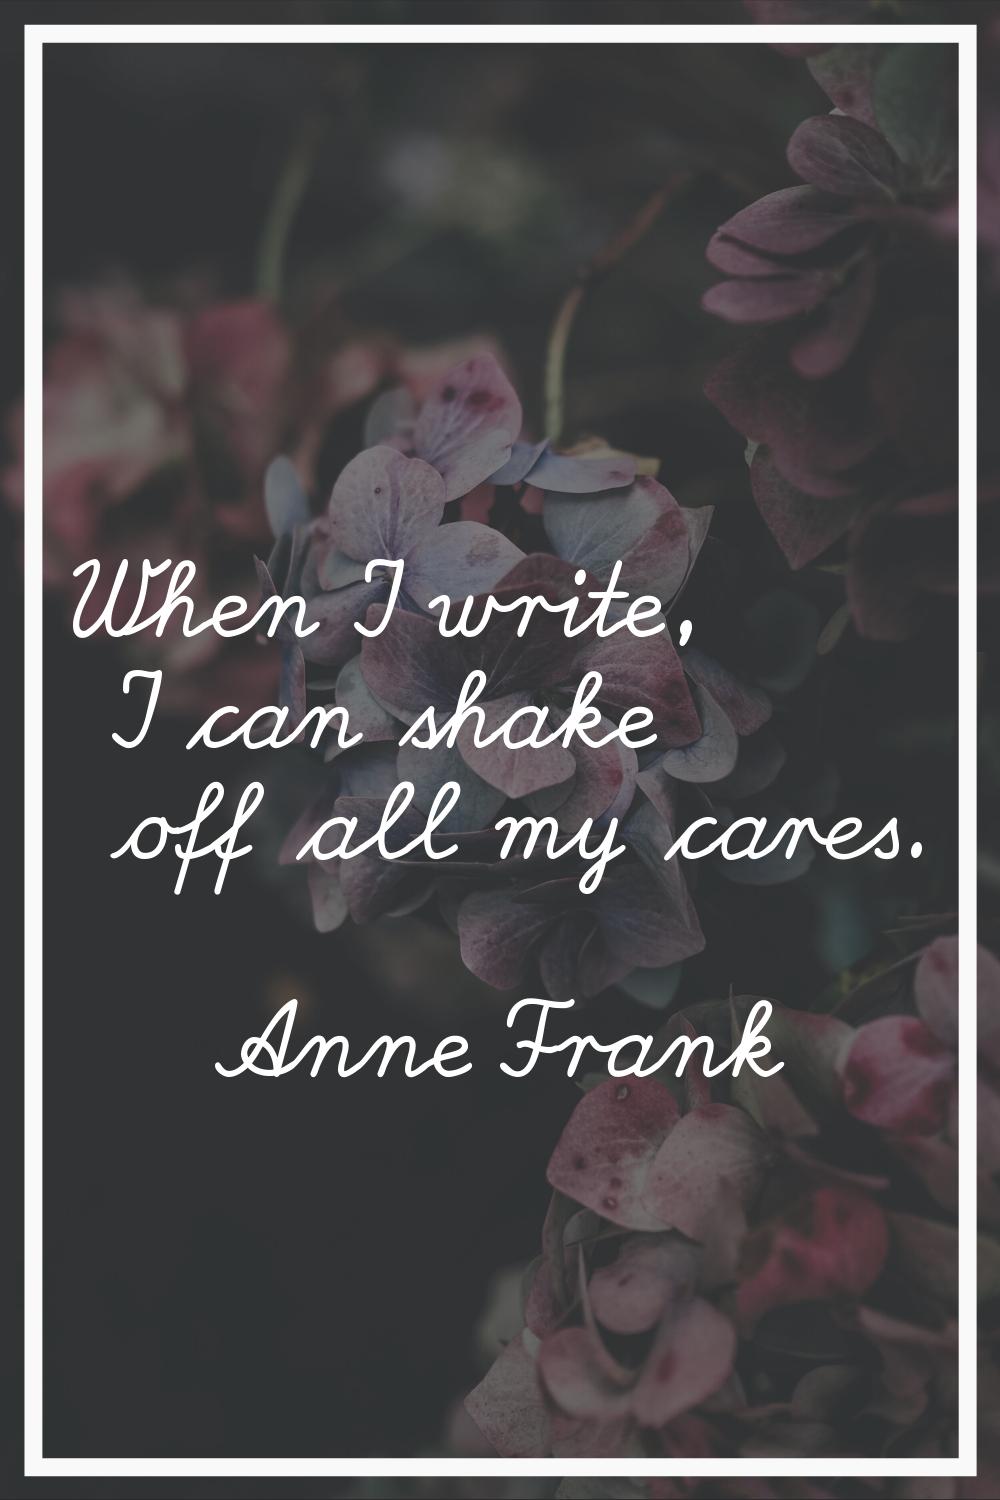 When I write, I can shake off all my cares.